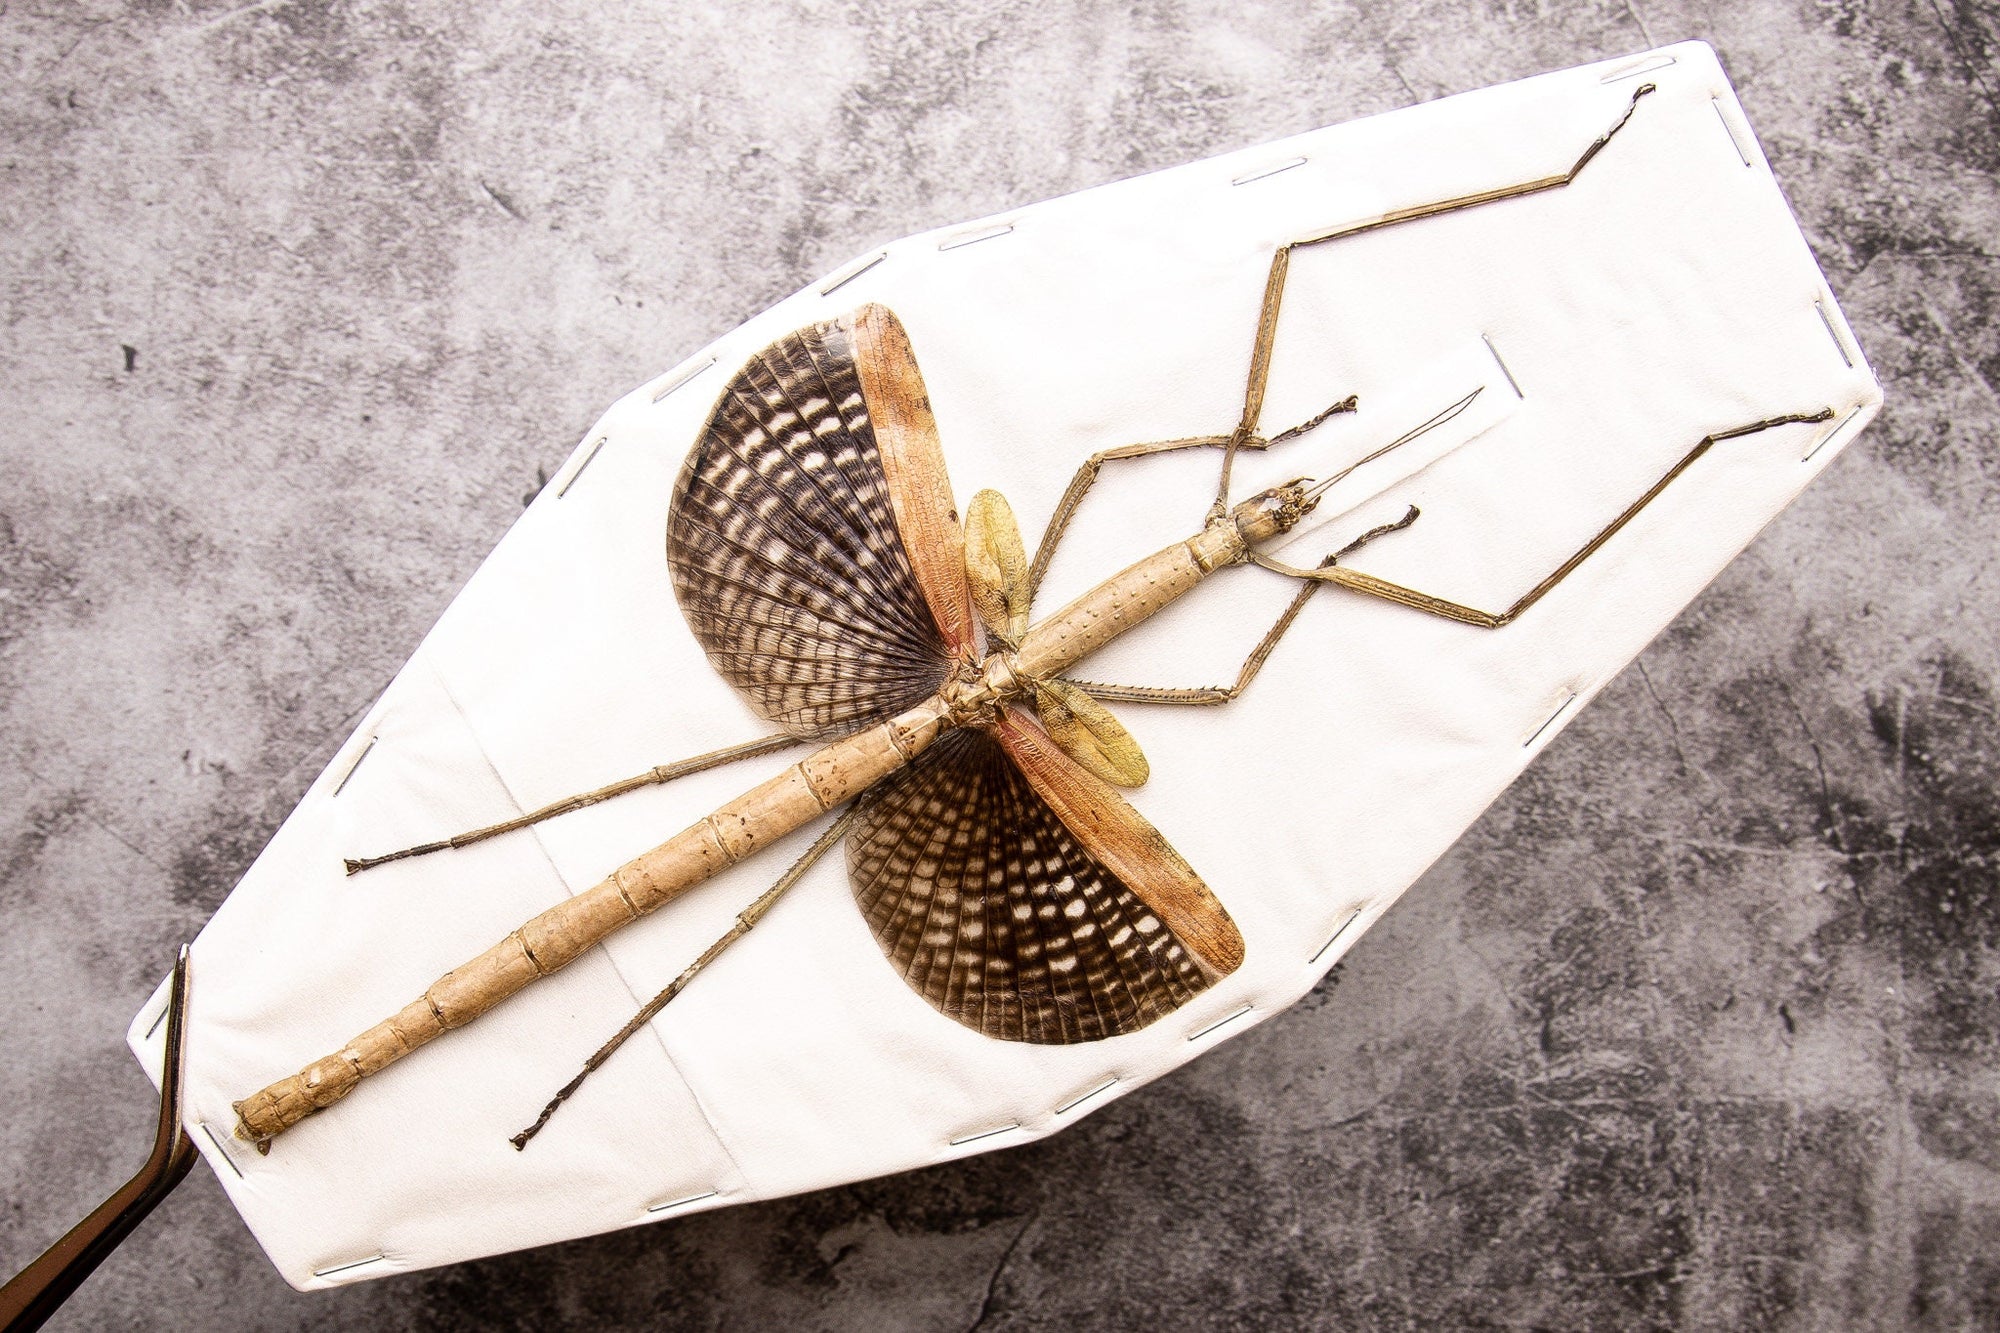 2 x Buru Giant Stick Insect (Anchiale buruense) 17cm+ A1 Real Entomology Taxidermy Specimen from Indonesia